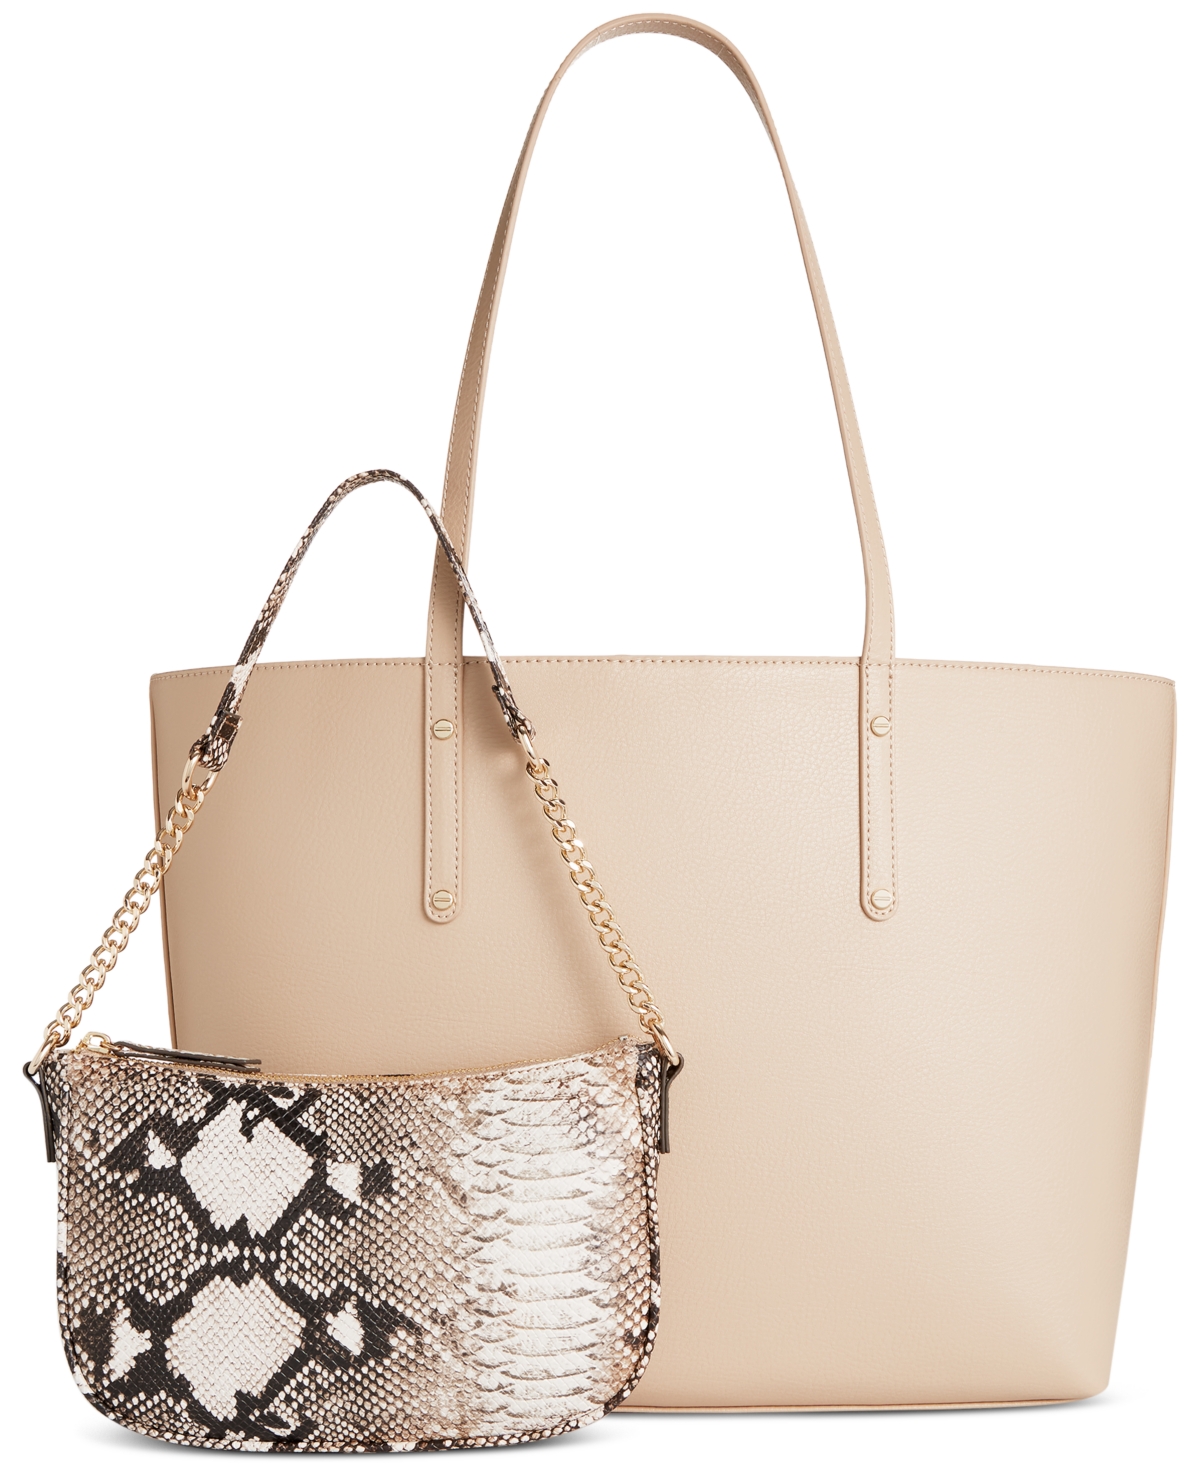 Zoiey 2-In-1 Extra-Large Tote, Created for Macy's - Corn Husk/snake